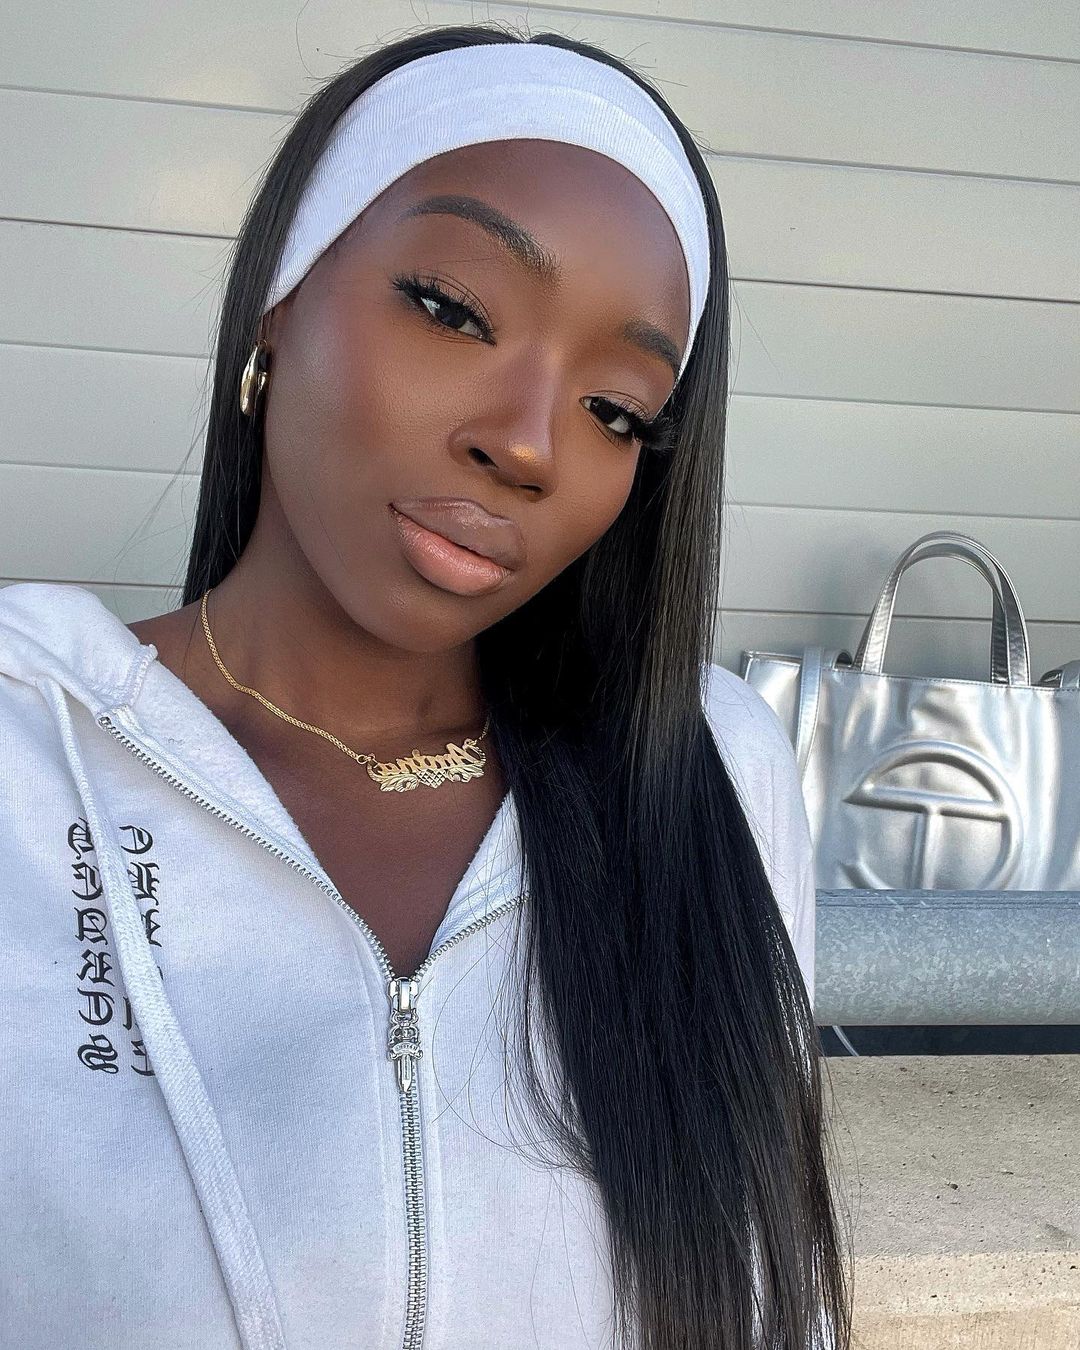 Amina Cocoa Shared Her Everyday Makeup Routine, and It’s Pure ...